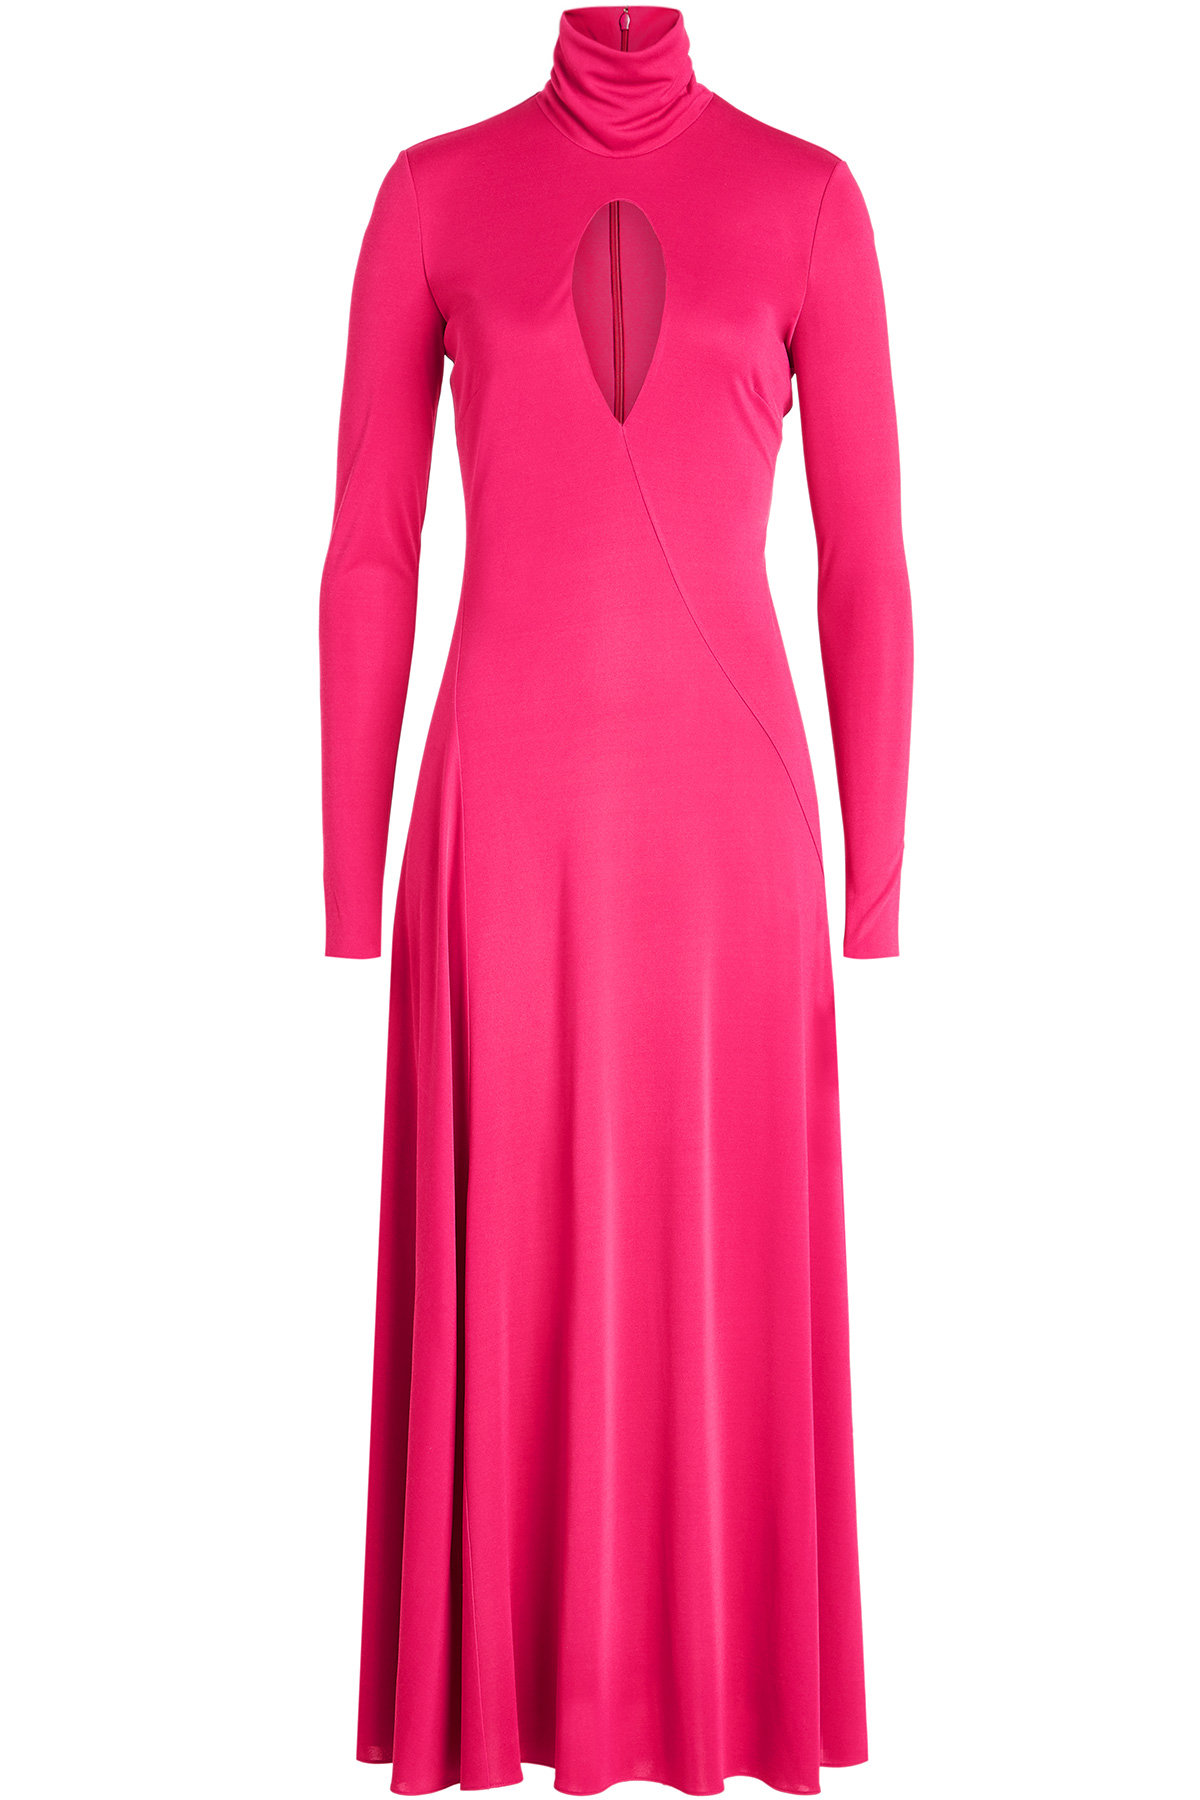 Emilio Pucci - Floor Length Gown with One Sleeve